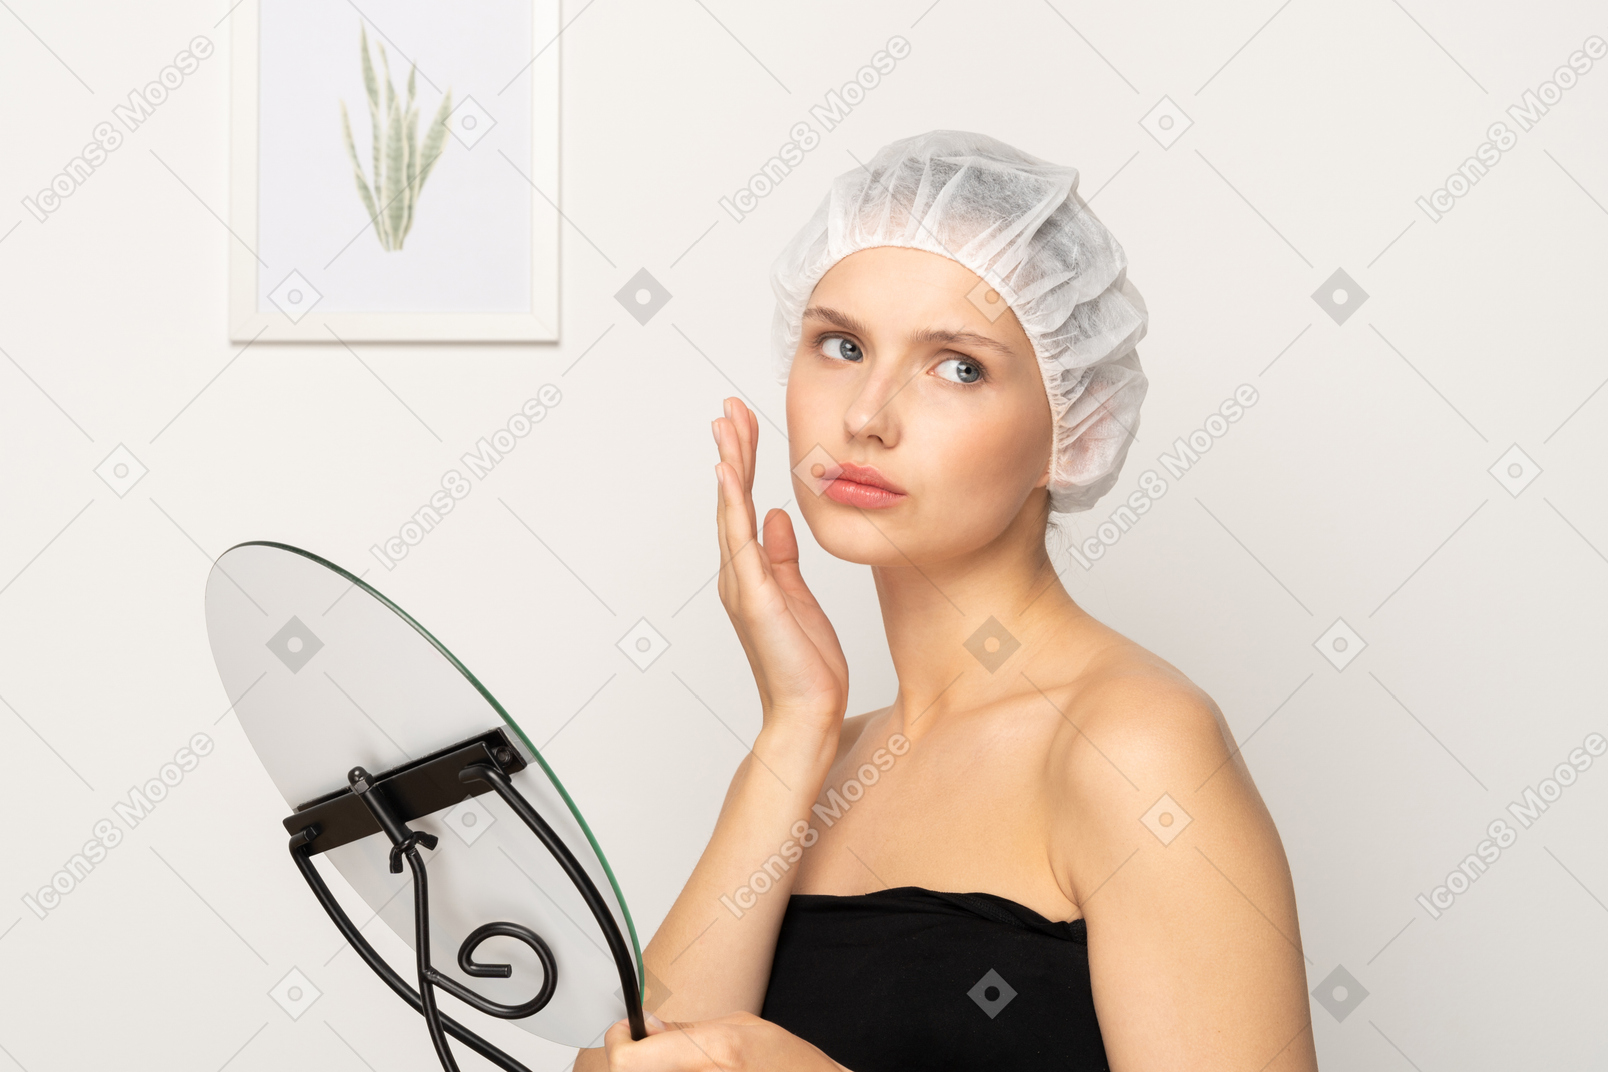 Frustrated woman in cap holding the mirror